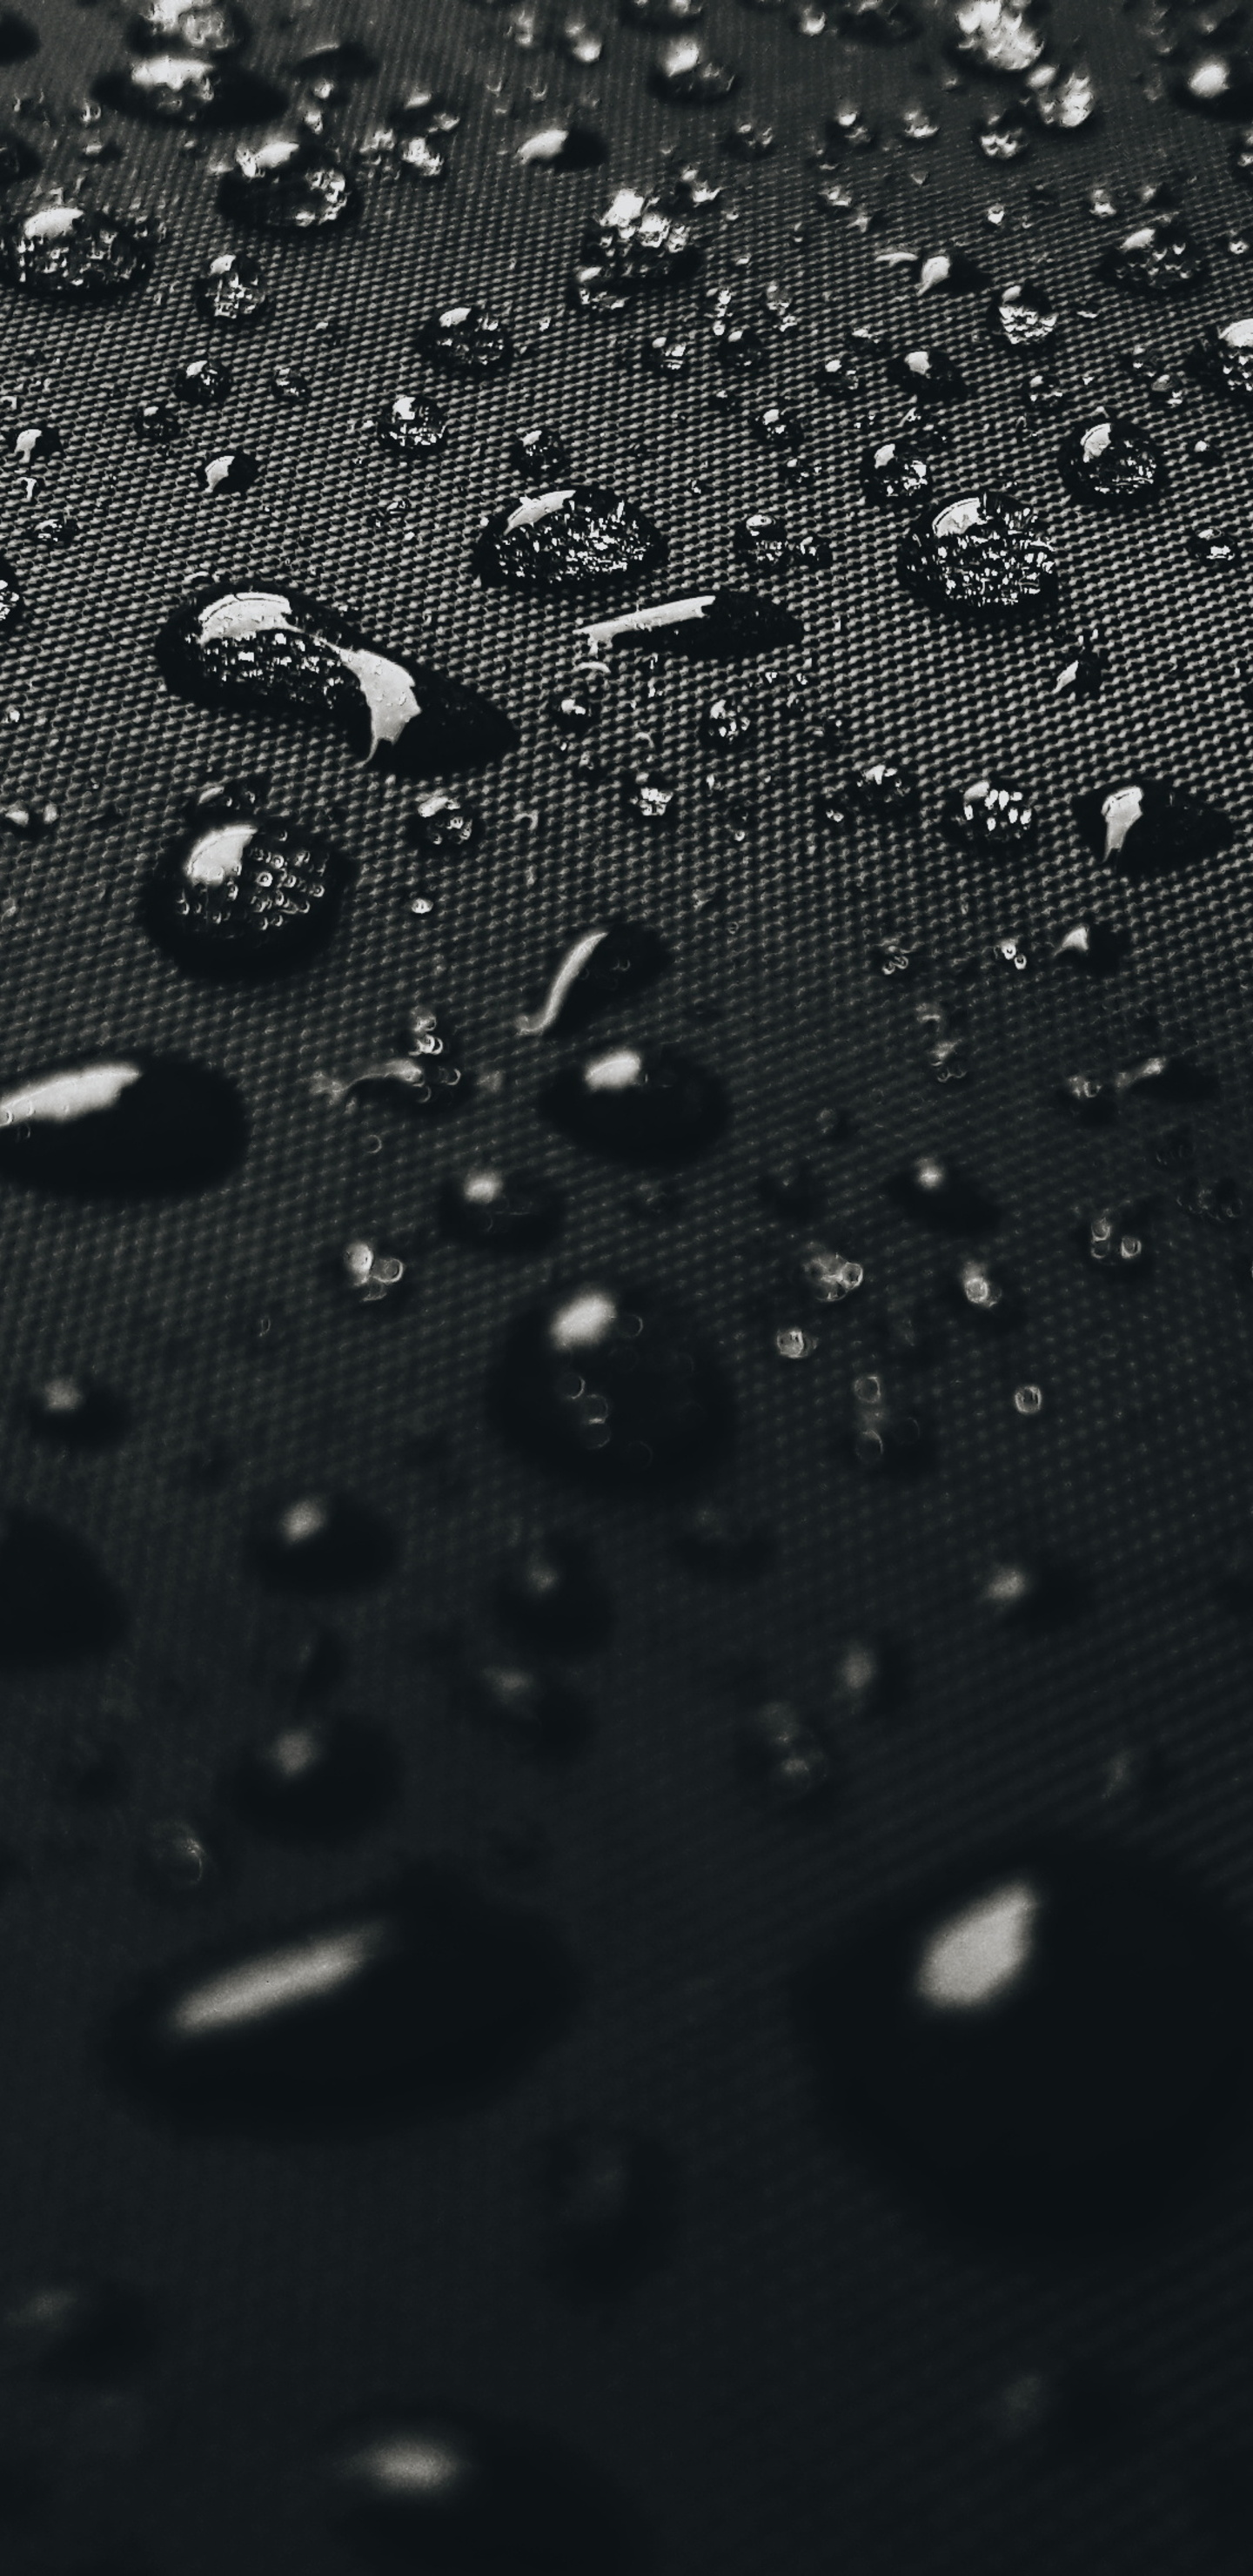 1440x2960 Water Drops On Black Surface 4k Samsung Galaxy Note 98  S9S8S8 QHD HD 4k Wallpapers Images Backgrounds Photos and Pictures